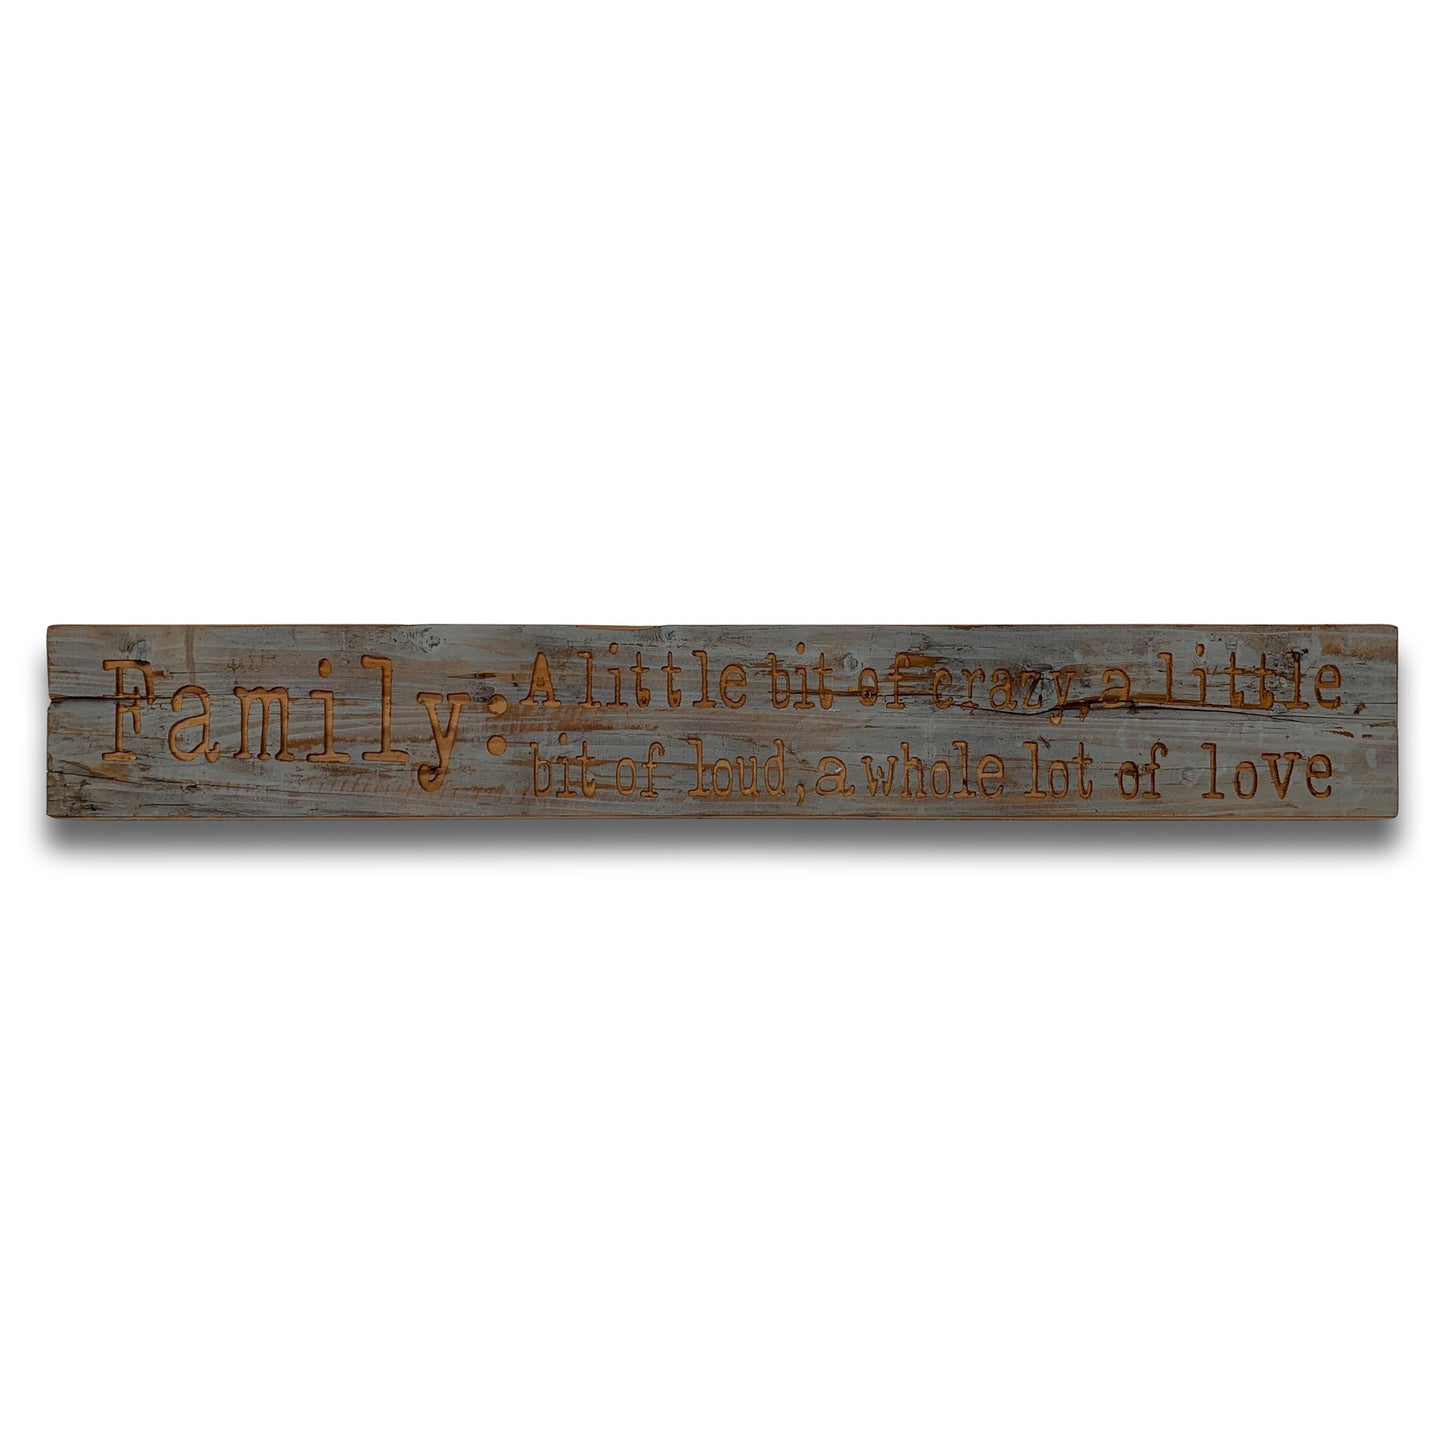 Hill Interiors Family Large Grey Wash Wooden Message Plaque